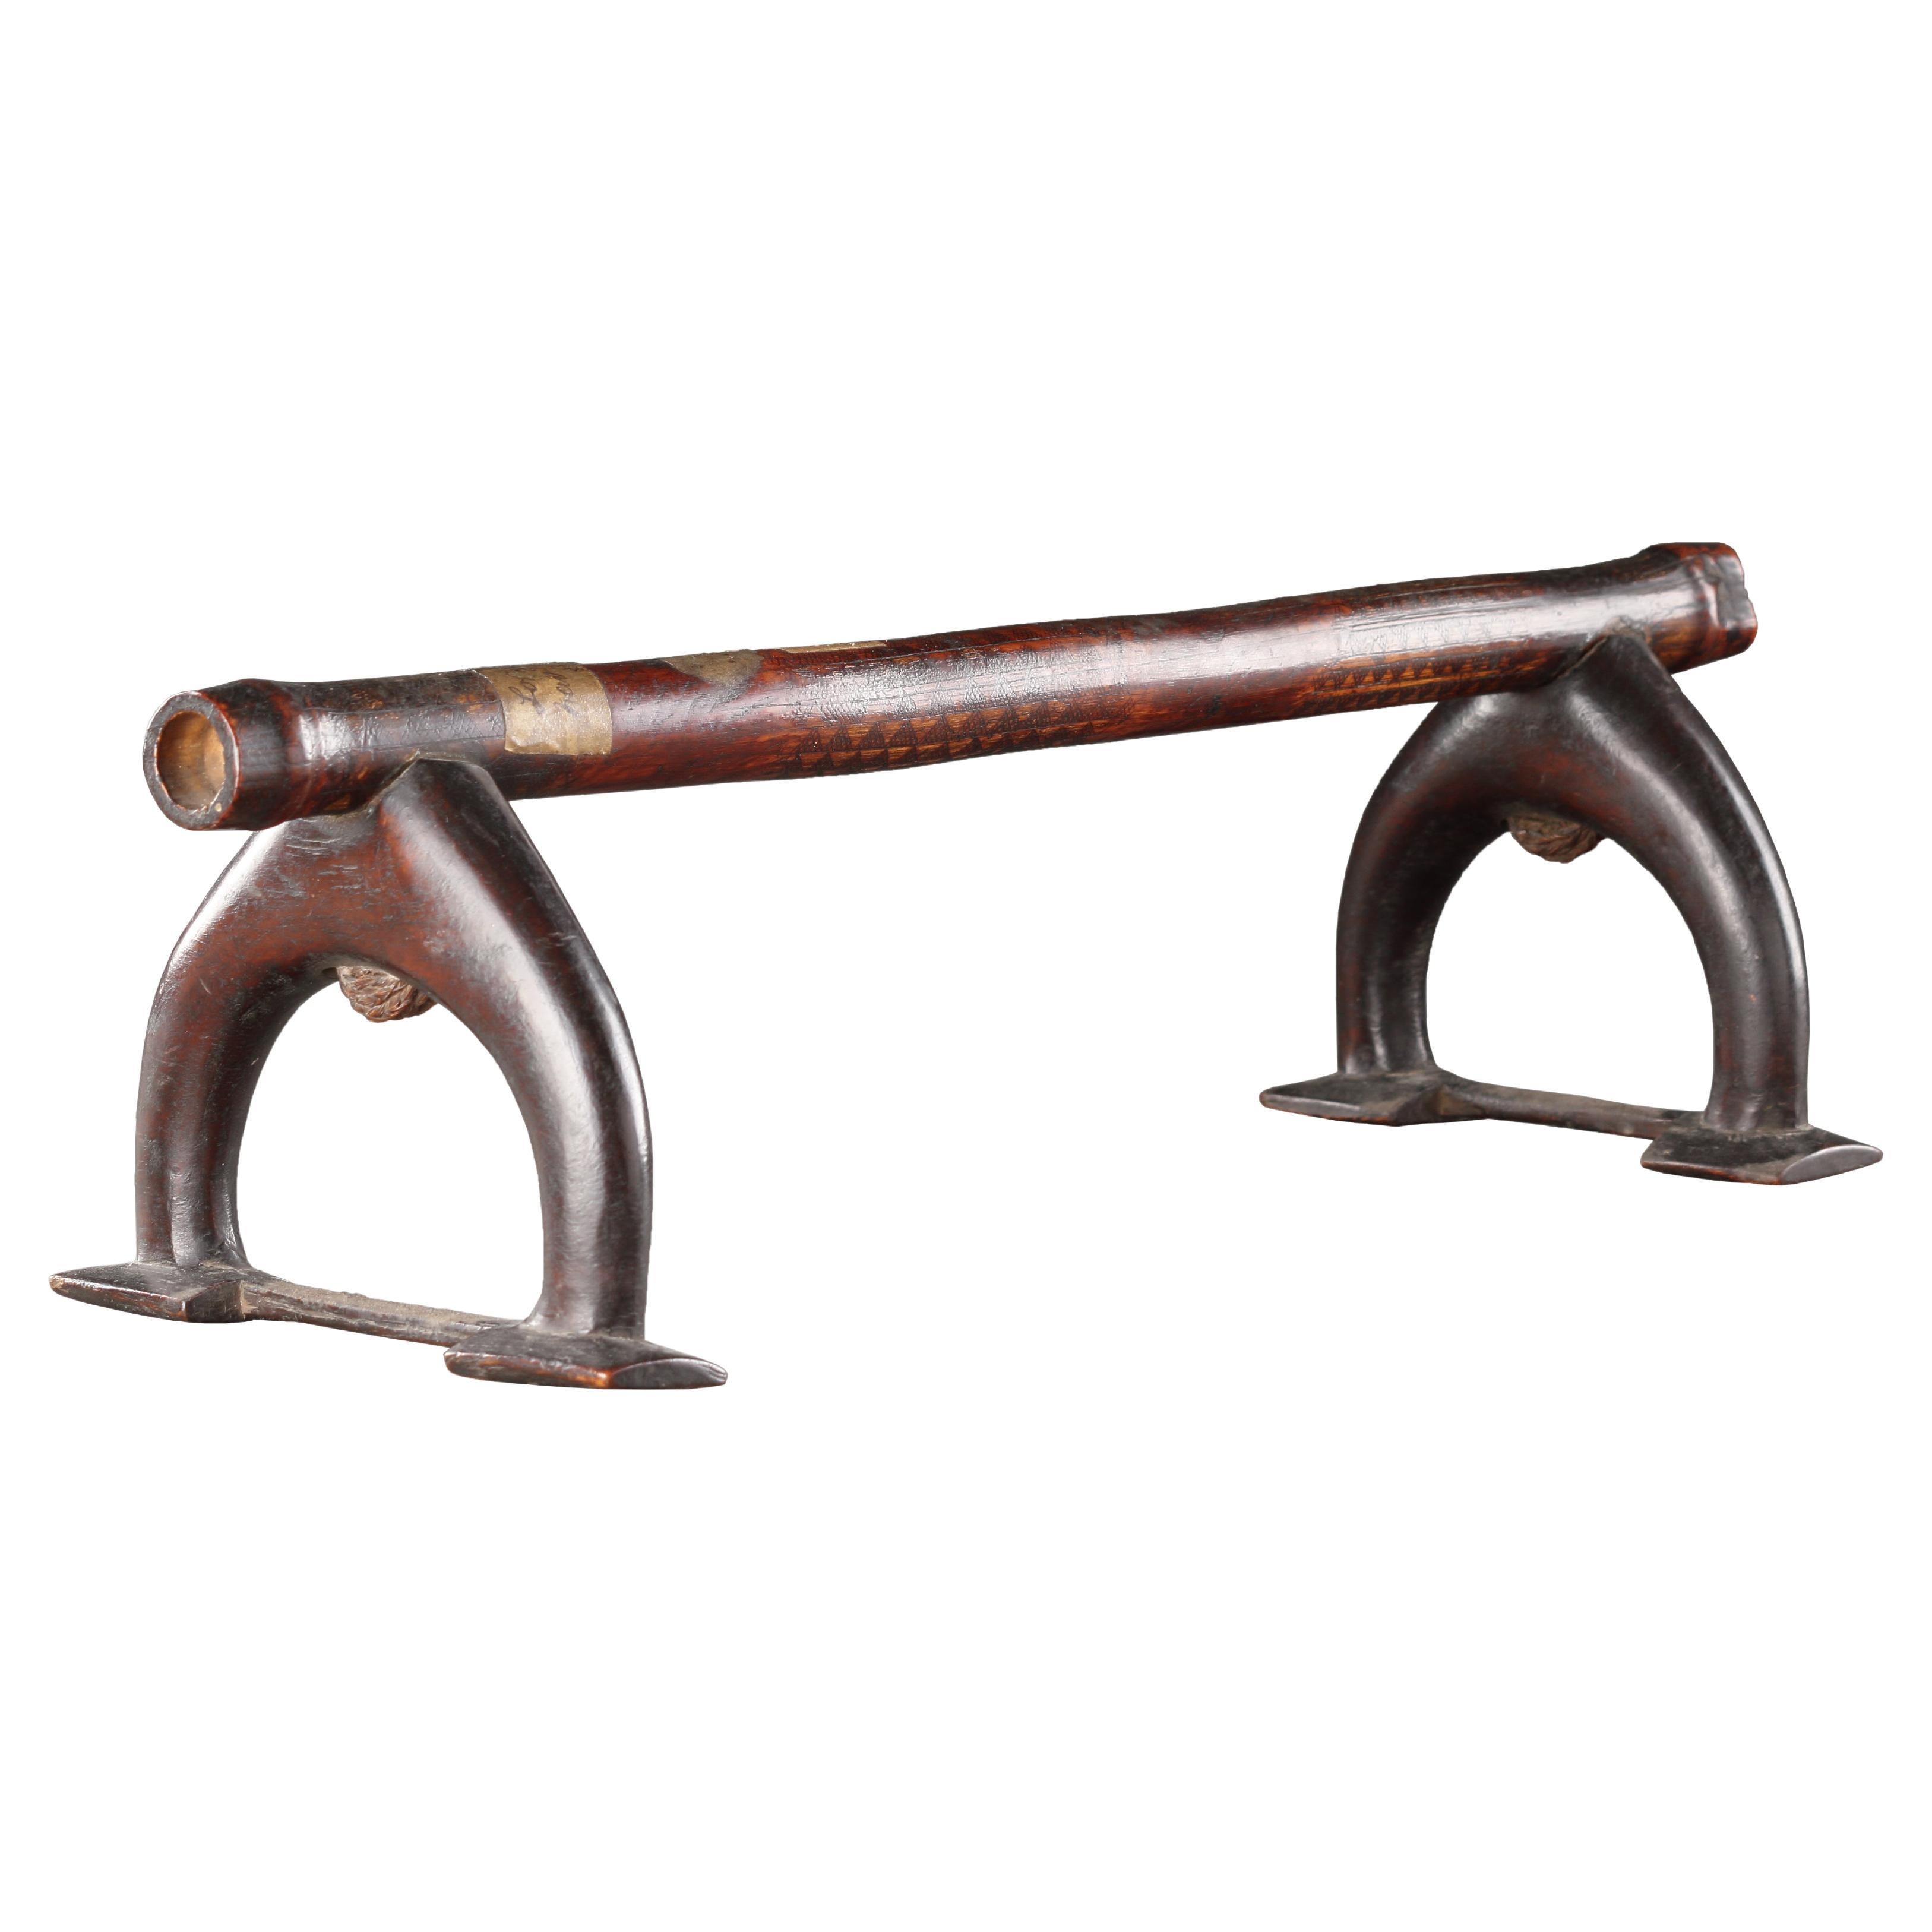 A Very Fine and Rare Headrest ‘Kali’ or ‘Kalimasi’ / ‘Kali Toloni’ For Sale